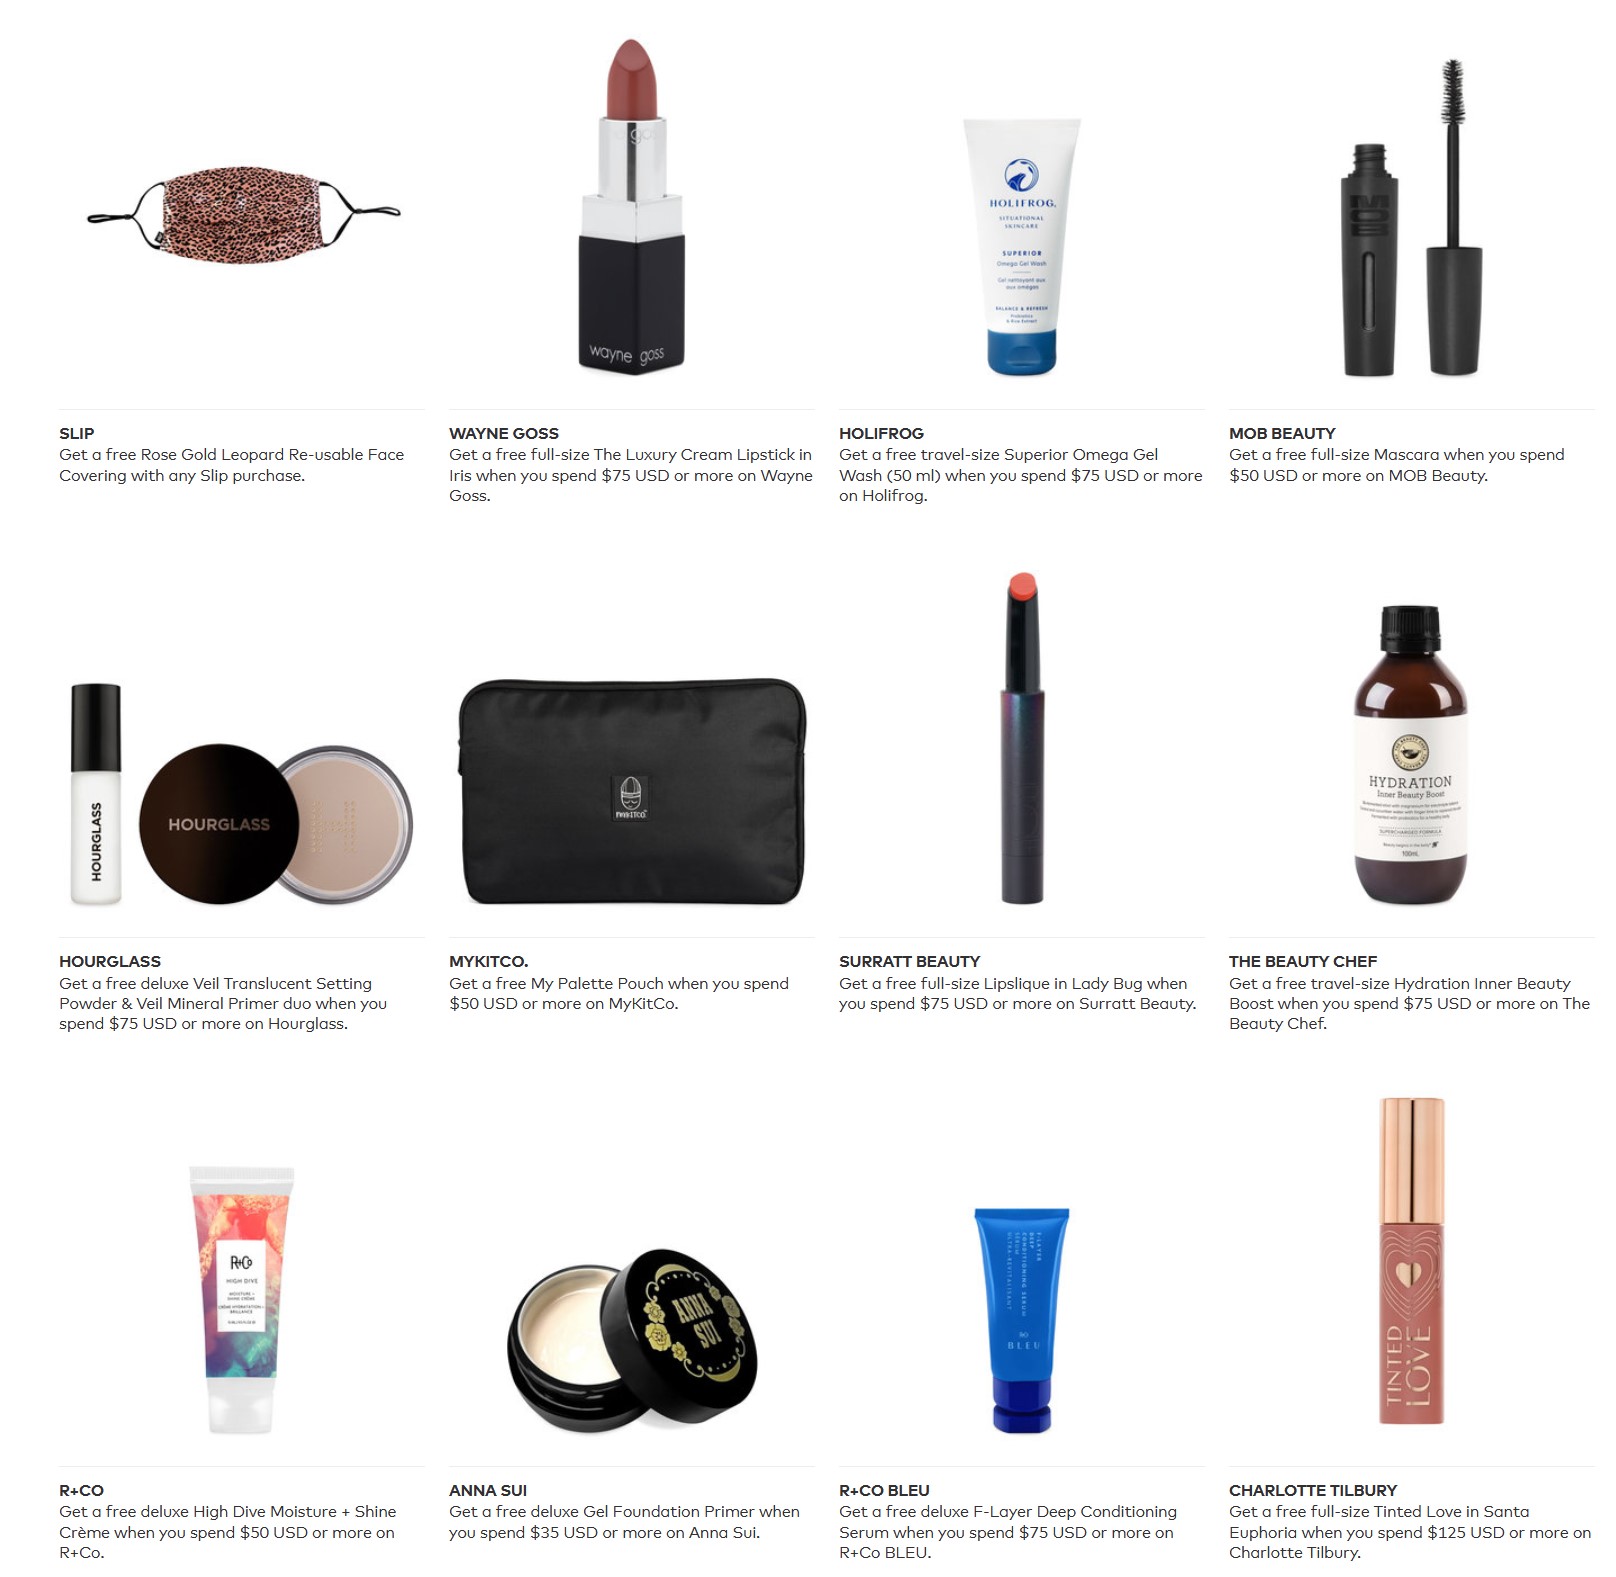 Gift with purchase offers at Beautylish.